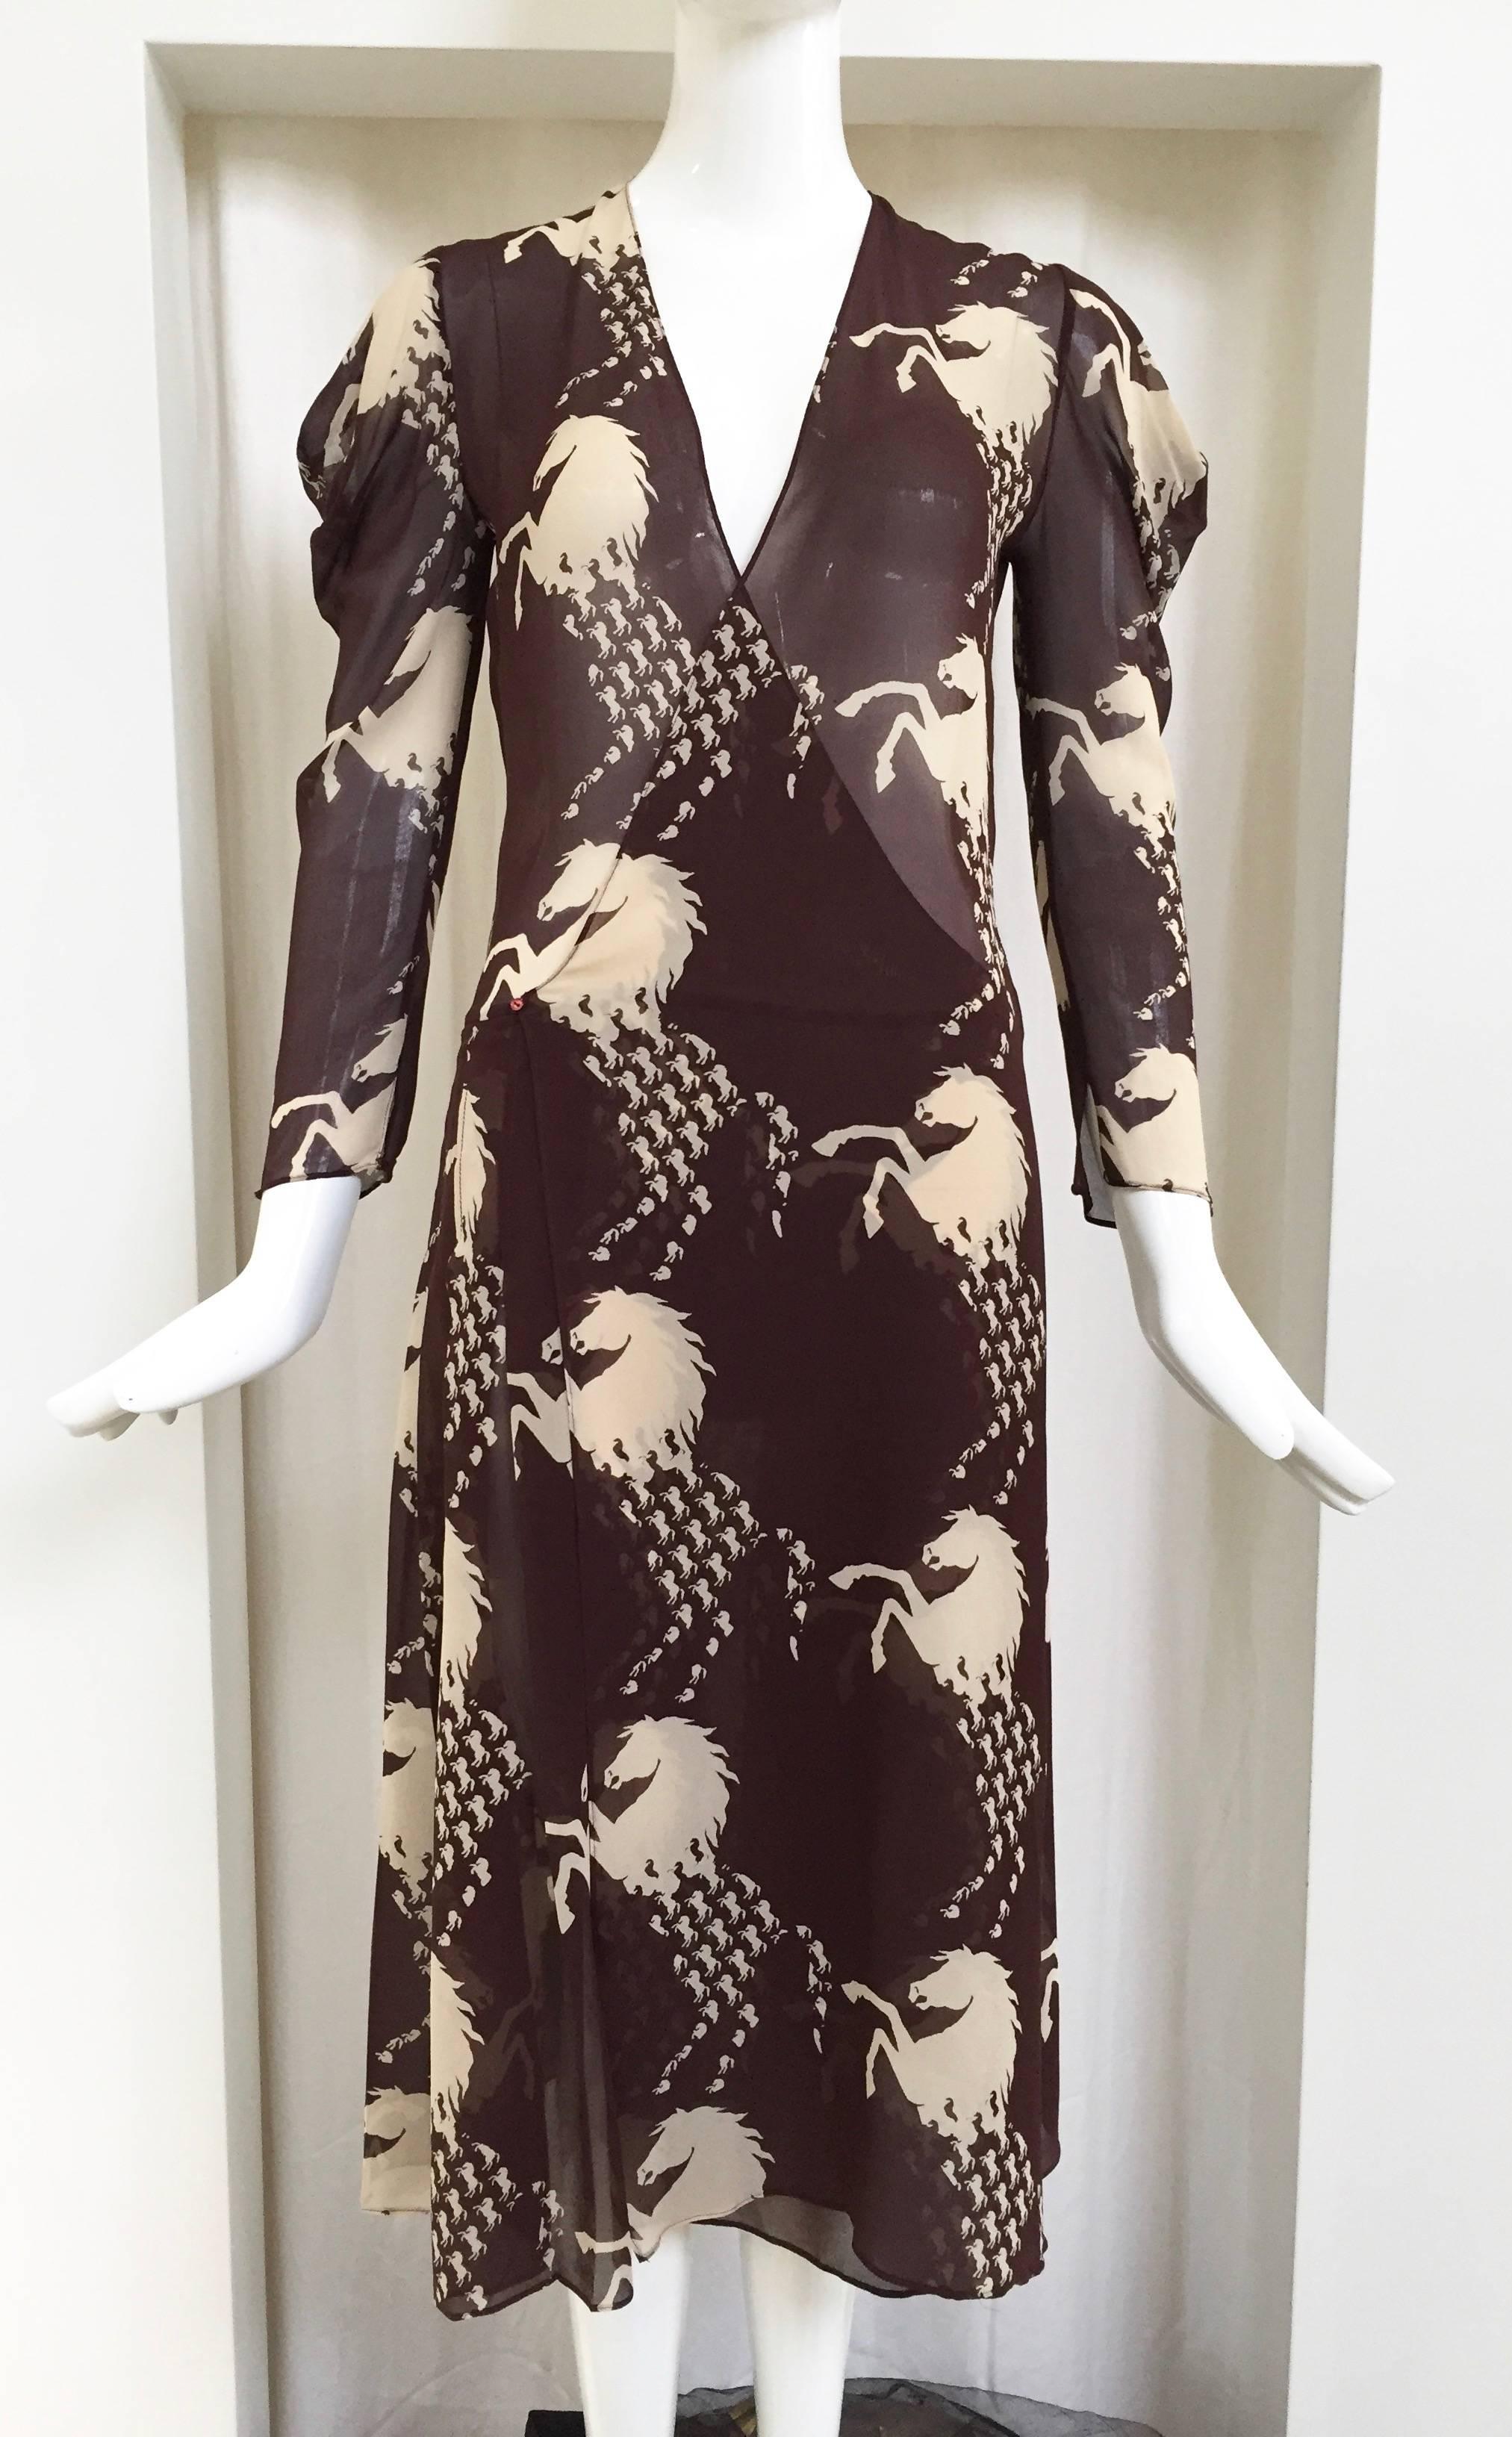 Designed by Stella Mccartney for Chloe - spring 2001.
As seen on Sarah Jessica Parker on Sex And The City.

Silk Chiffon wrap dress. ( dress is styled with 1950s tulle skirt) see pic# 2 without tulle skirt underneath. (skirt sold separately)